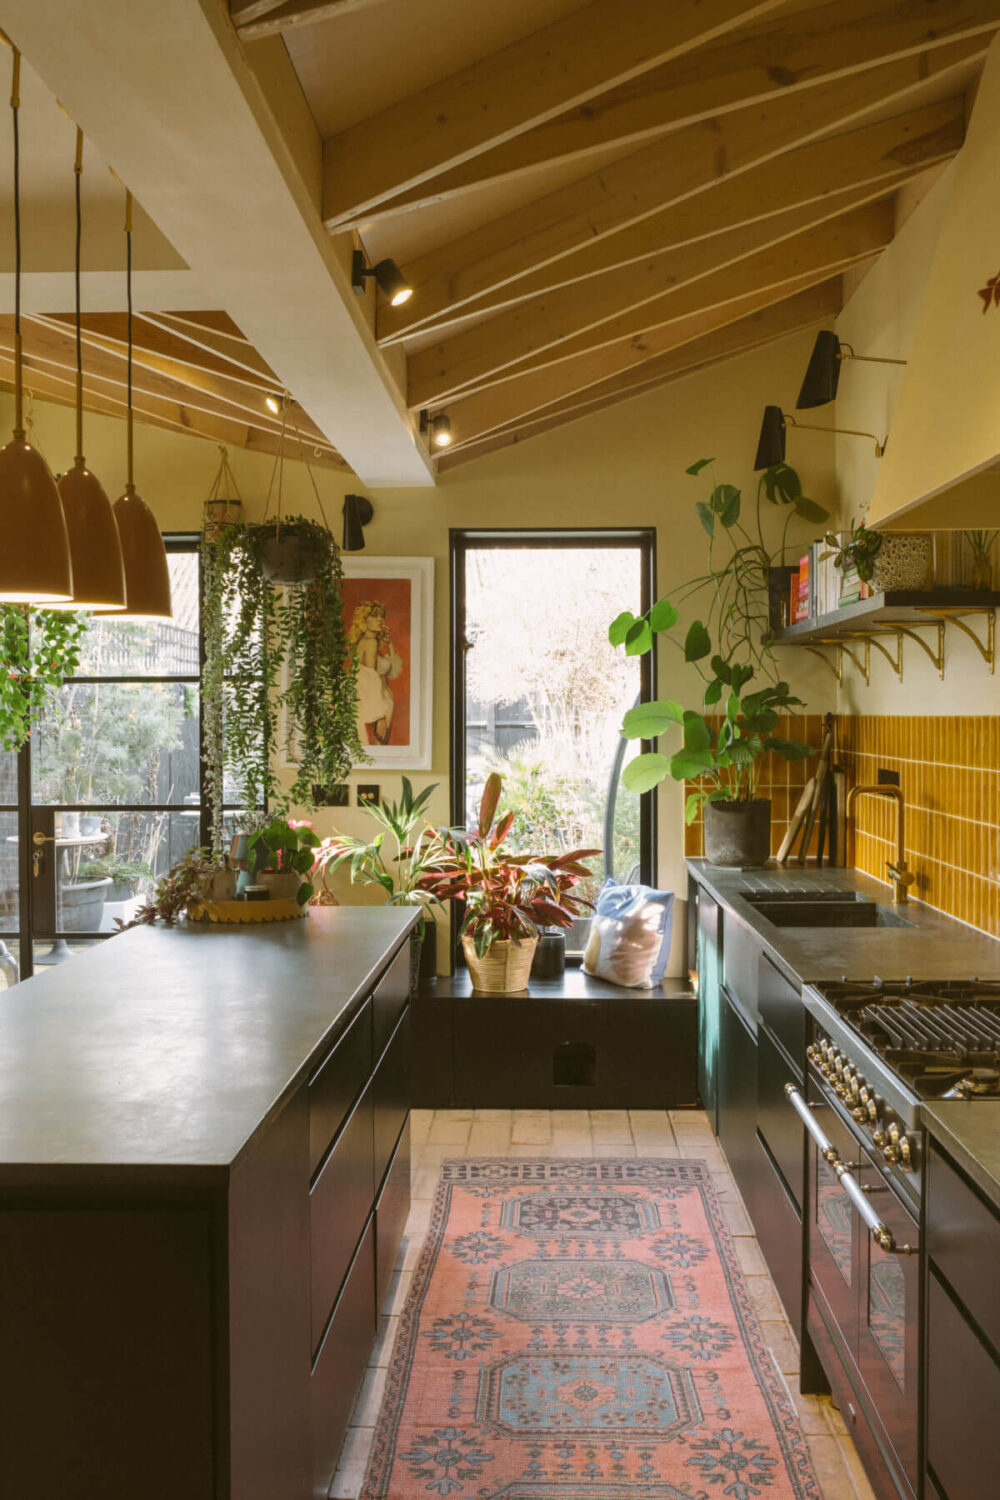 black-kitchen-ochre-yellow-tiles-wooden-beams-slanted-ceiling-nordroom